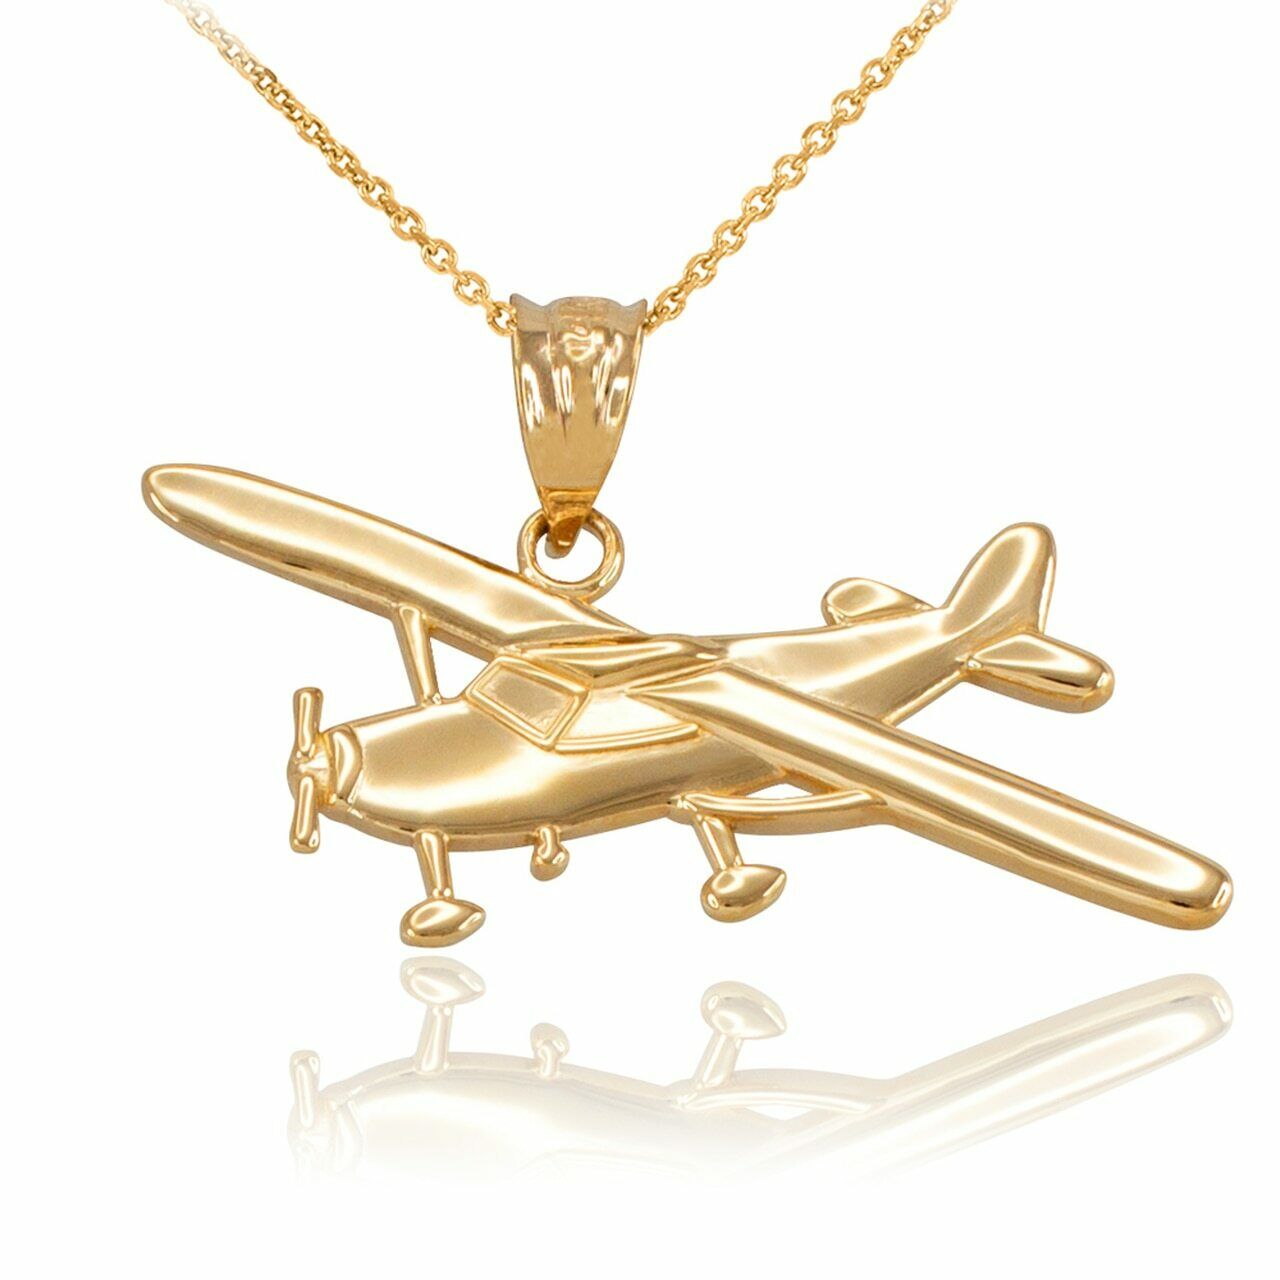 10k Solid Yellow Gold Piper Tri Pacer PA-20 Aircraft Airplane Pendant Necklace